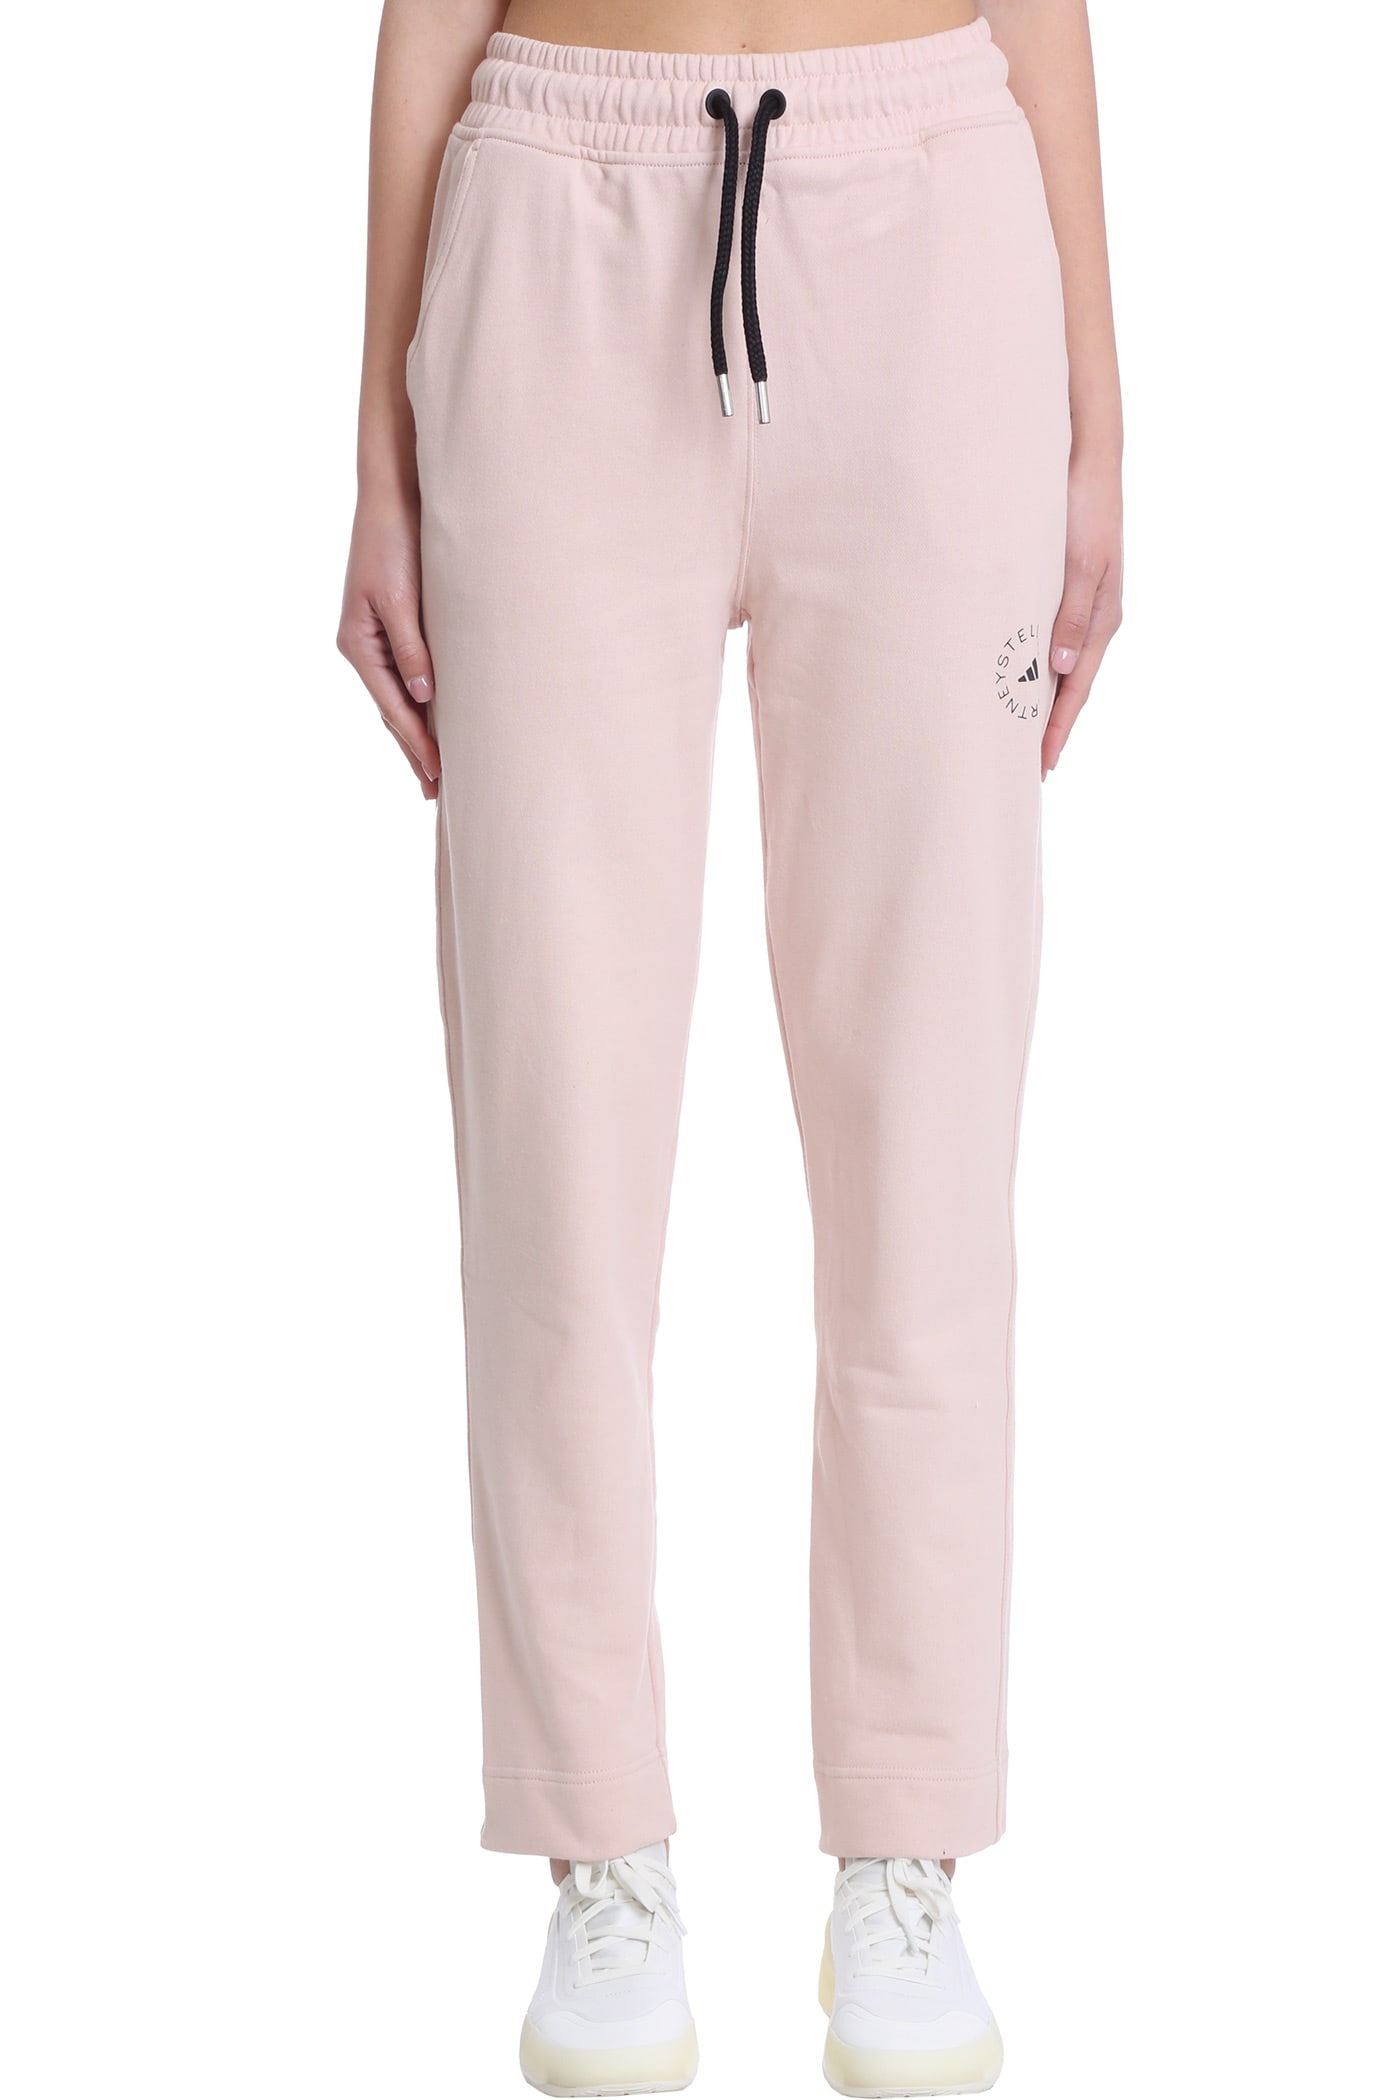 Adidas by Stella McCartney Pants In Rose-pink Cotton